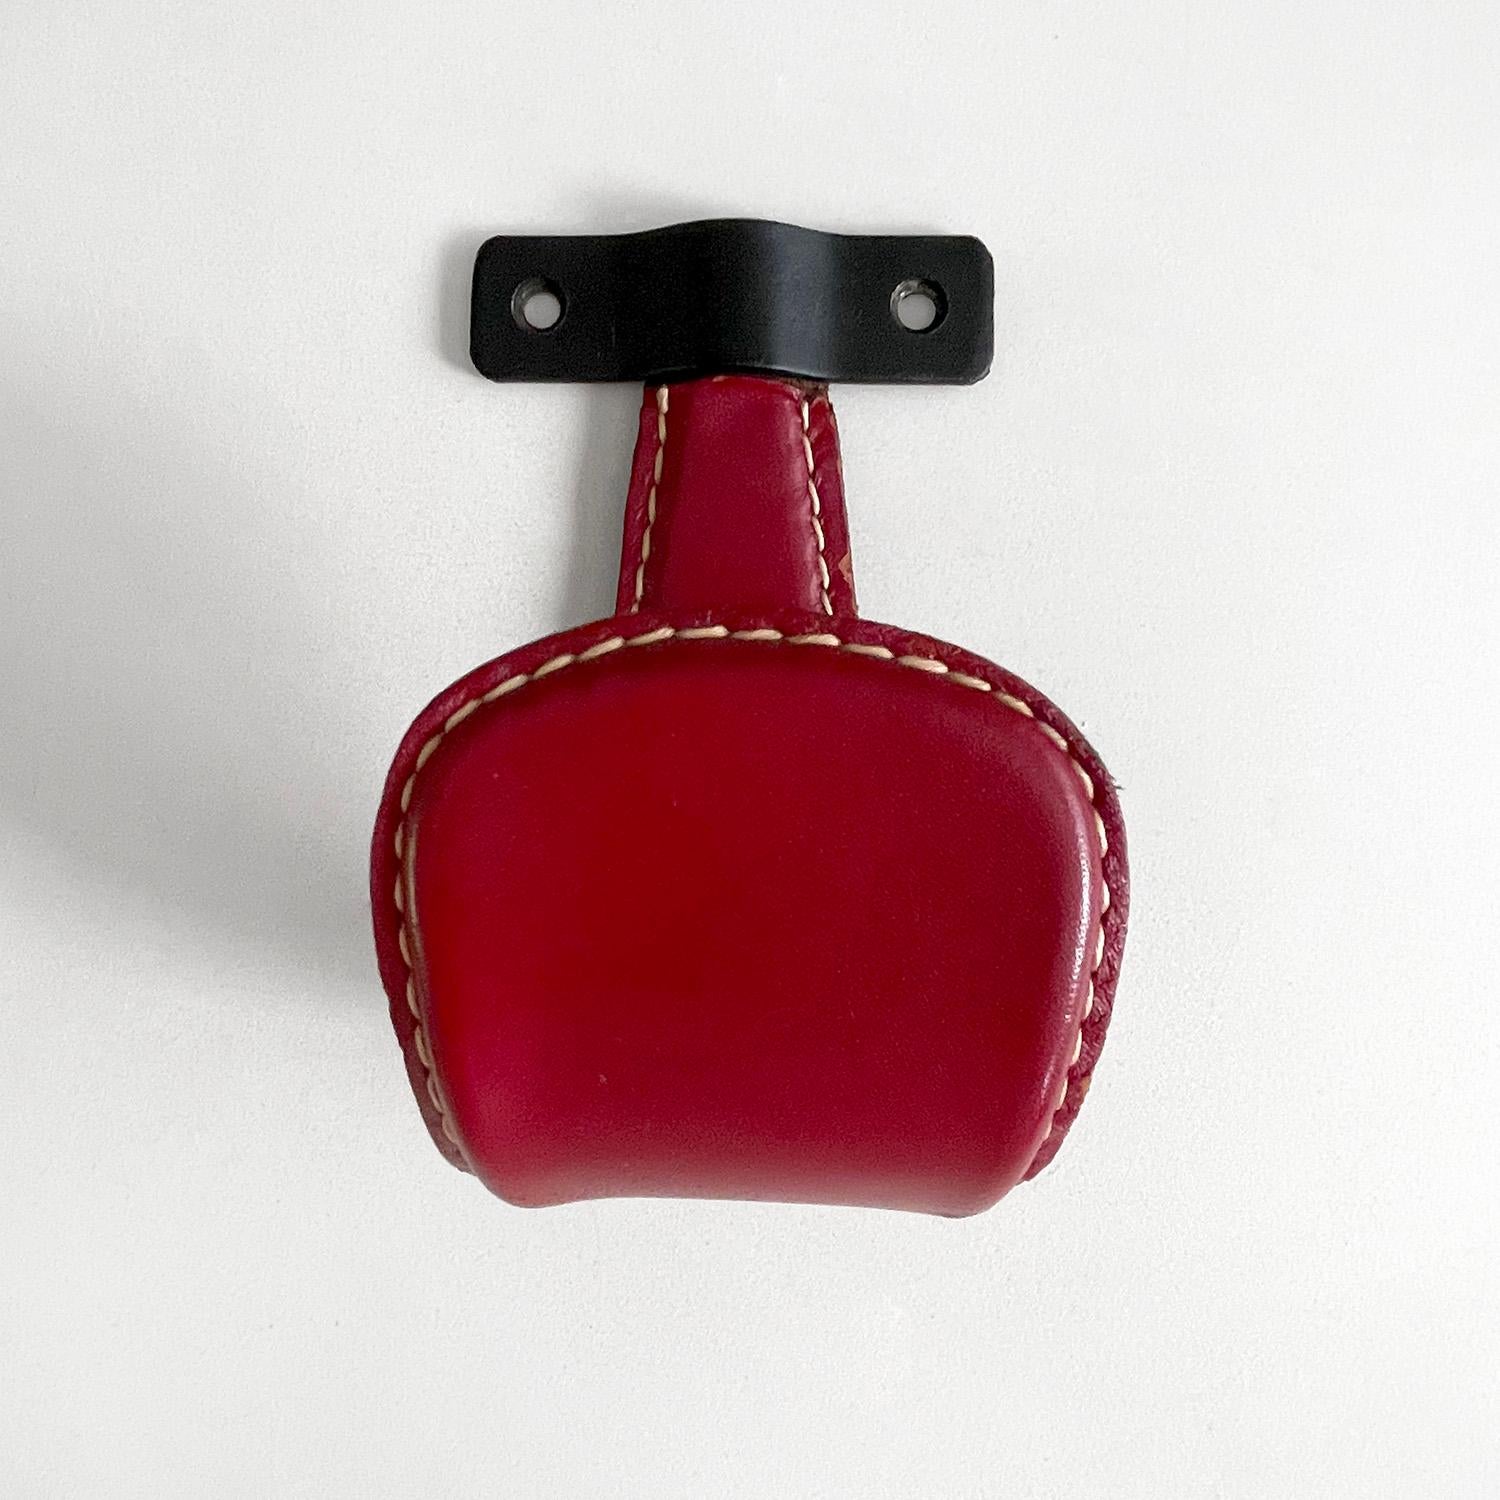 Jacques Adnet red leather & iron hook
France, circa 1940's
Wall mounted iron hook
Frame is wrapped in fire engine red leather
Signature contrast stitching
Light surface markings
Patina from age and use
Two hooks available
Sold separately
Last two